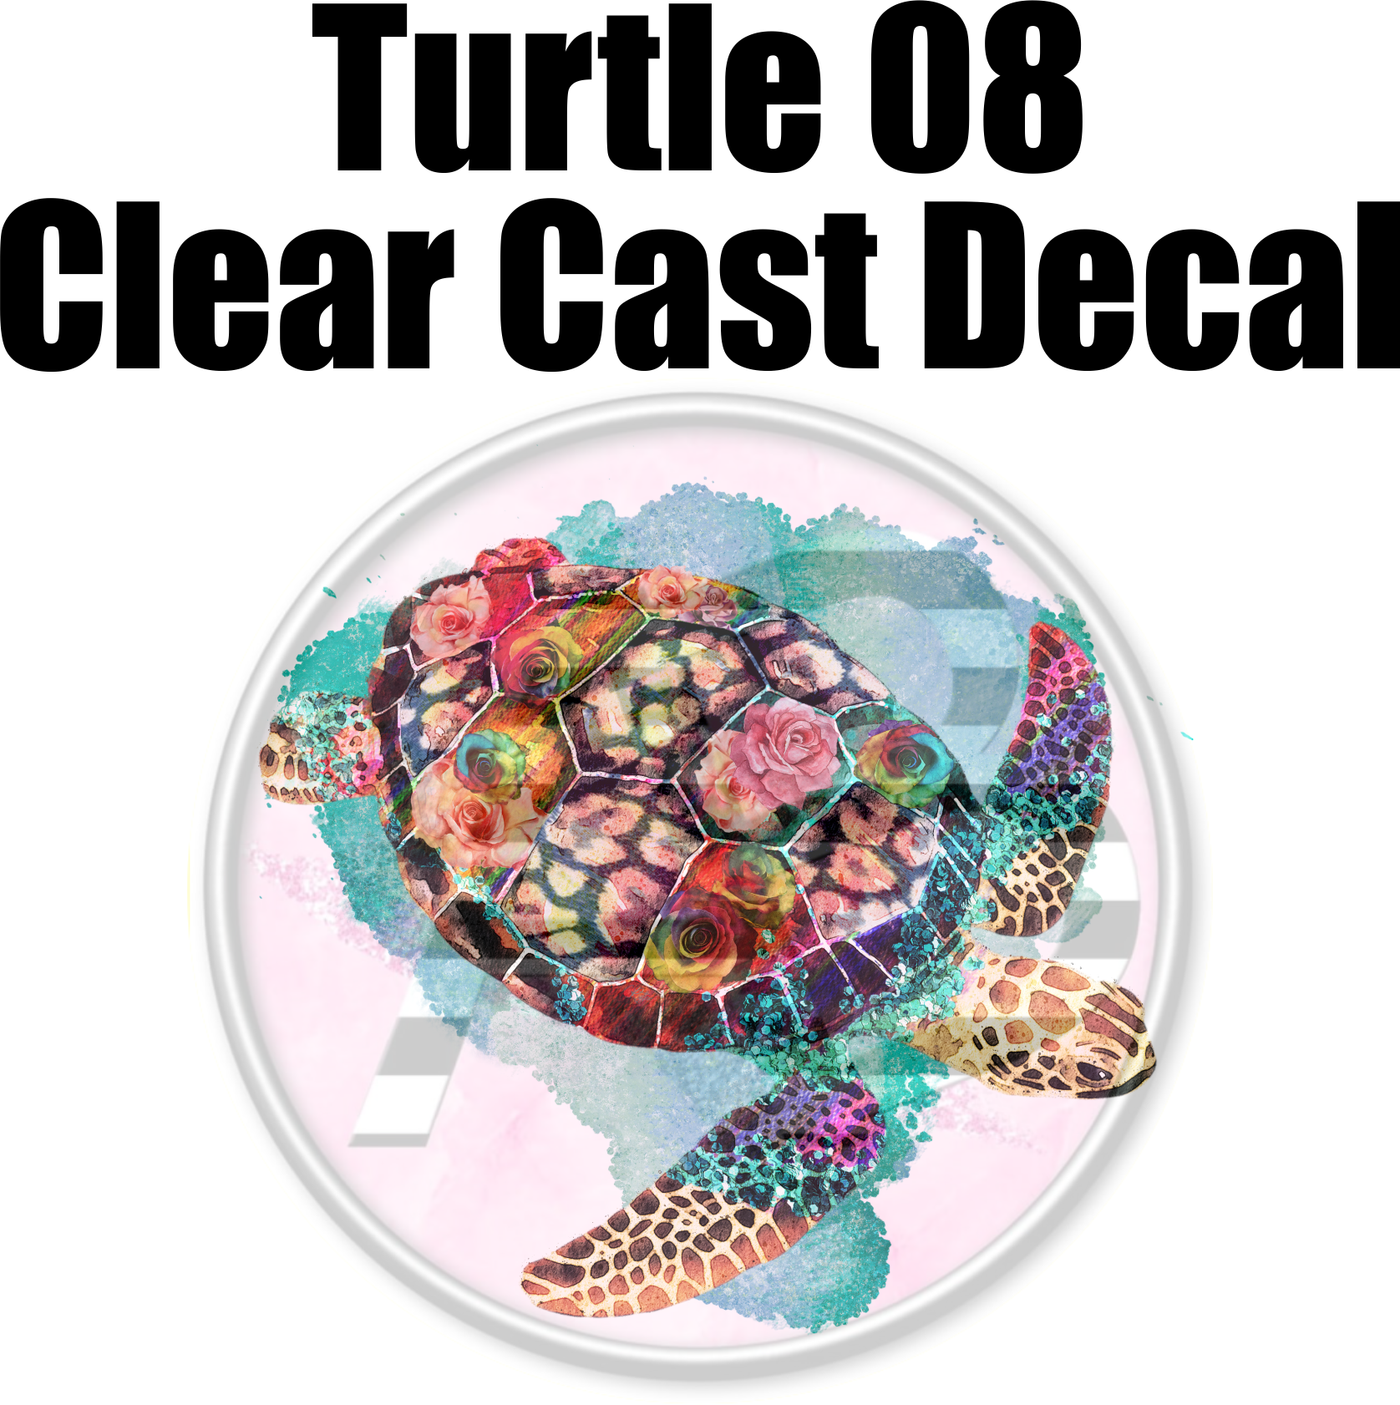 Turtle 08 - Clear Cast Decal